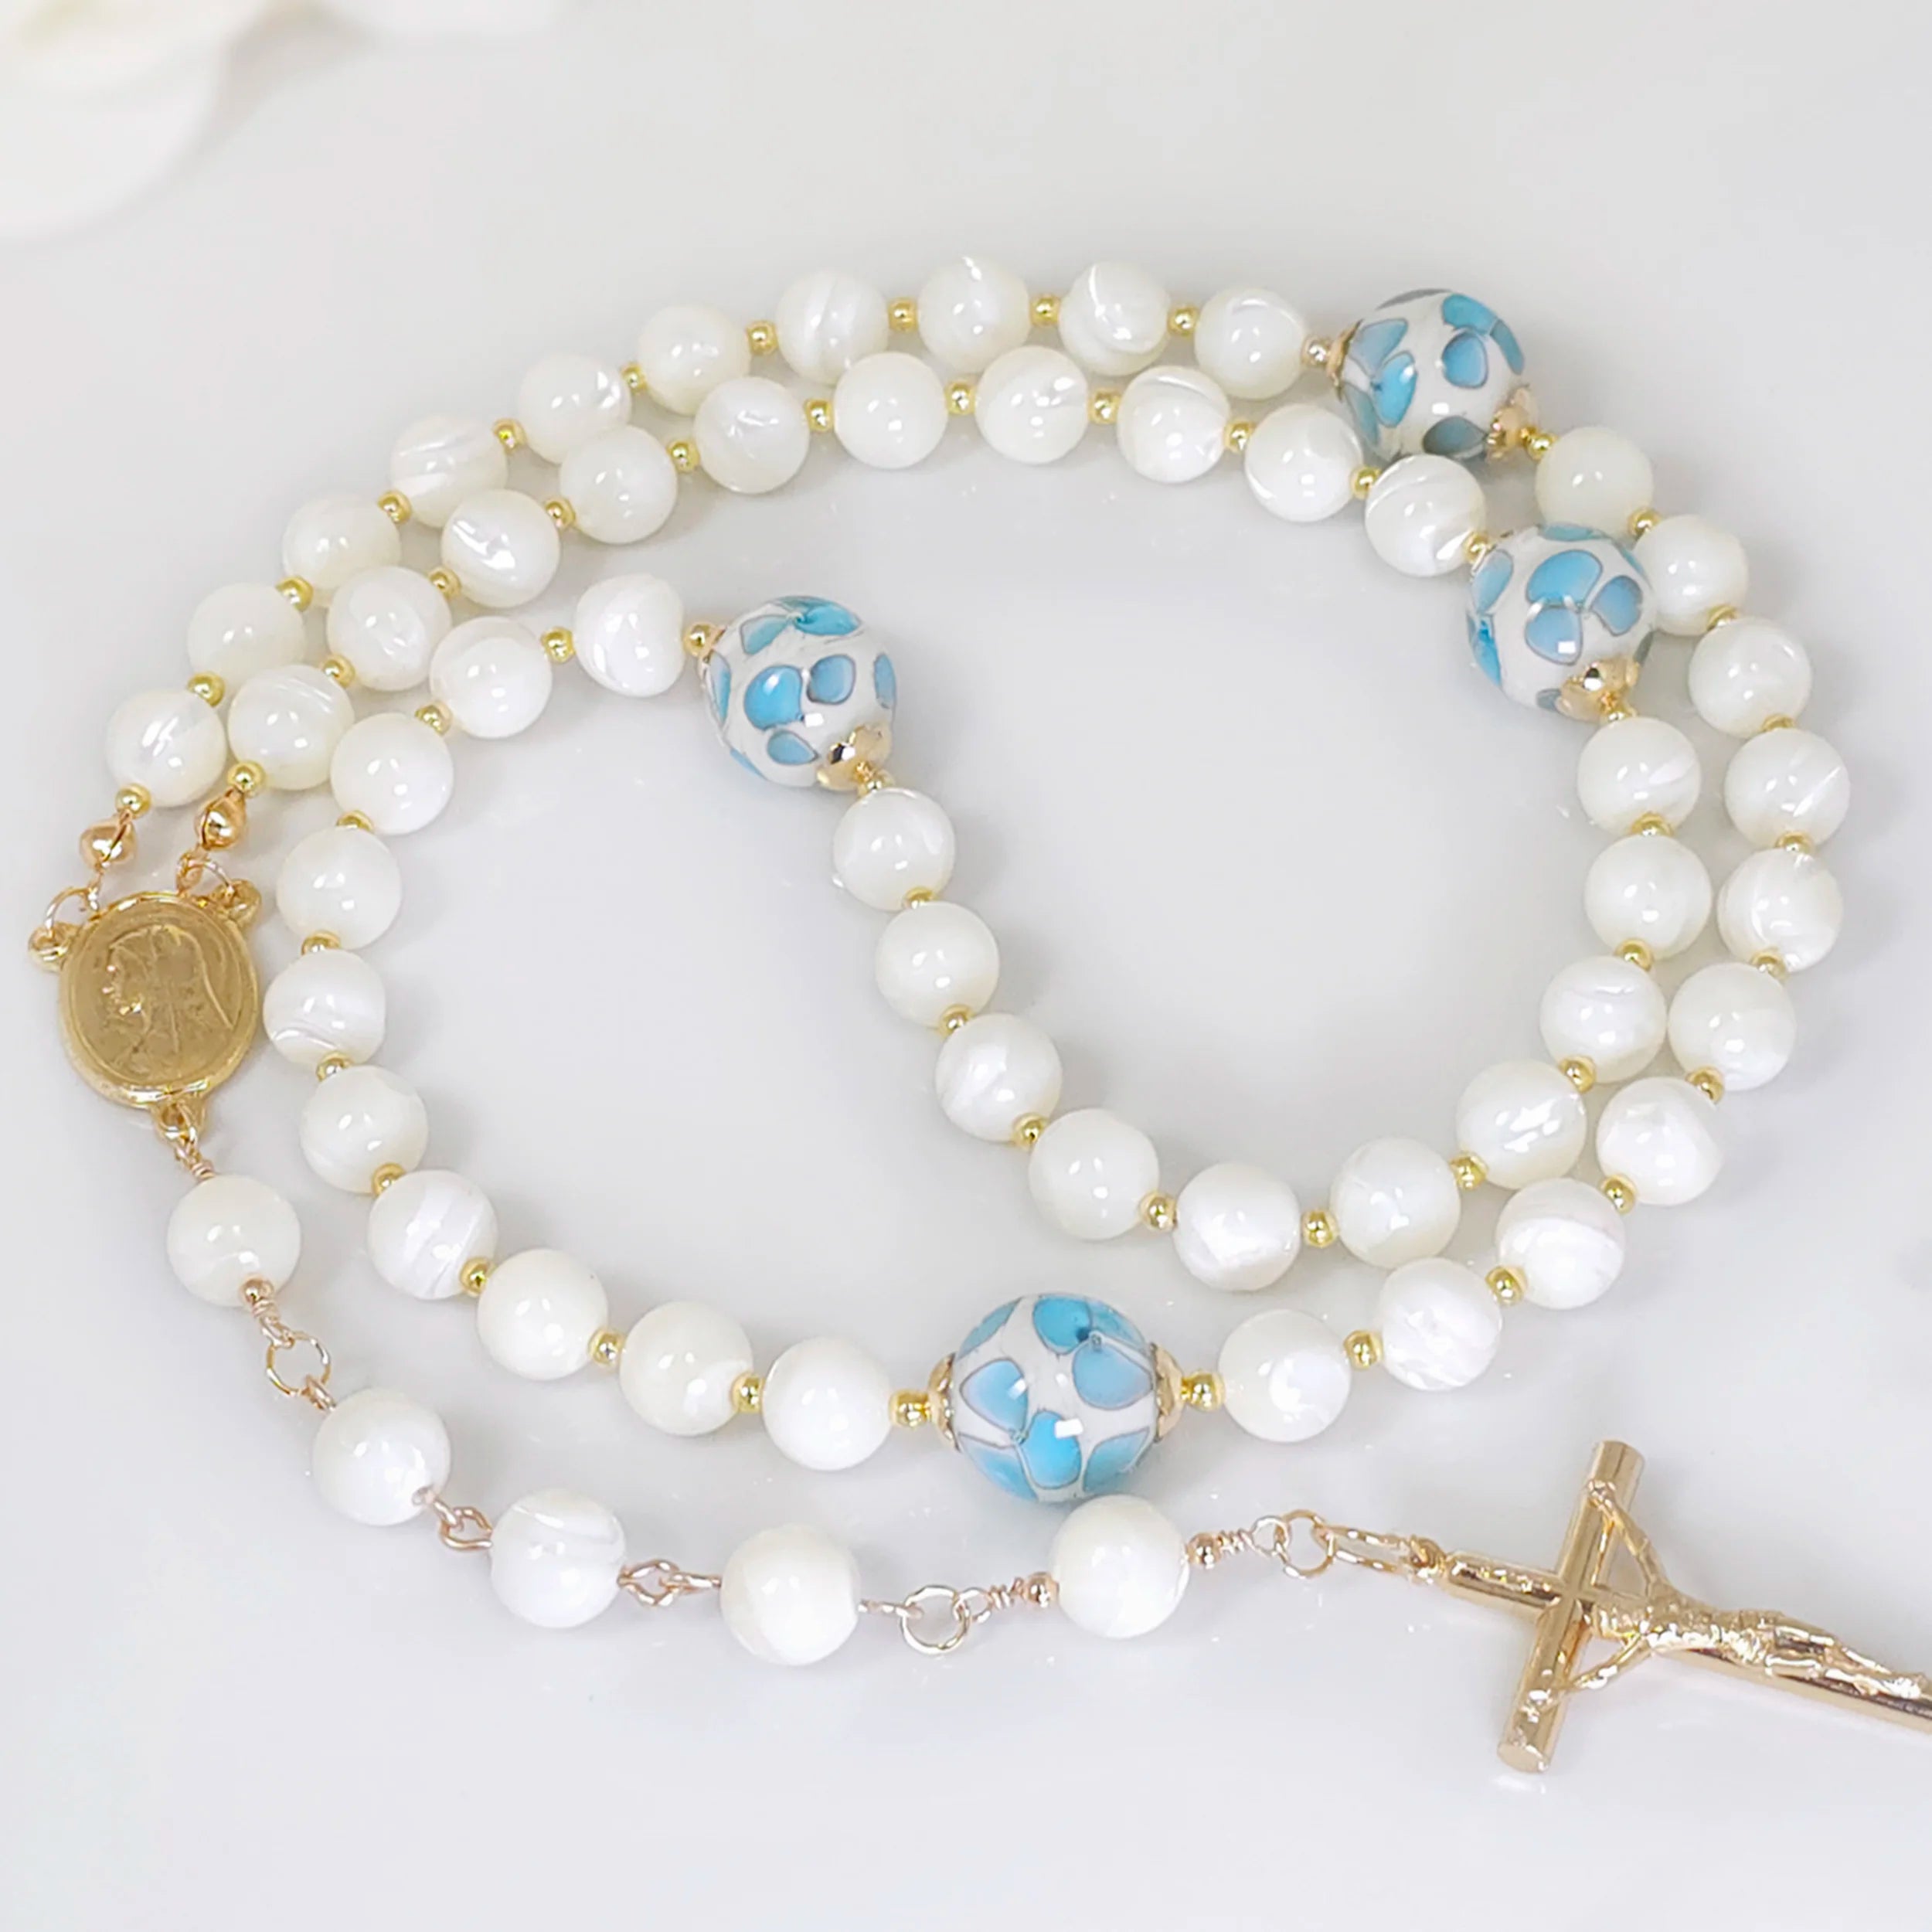 Little Blue Flower and Pearl Rosary Necklace with White Mother of Pearl, complemented by gold-filled spacers and bead caps.